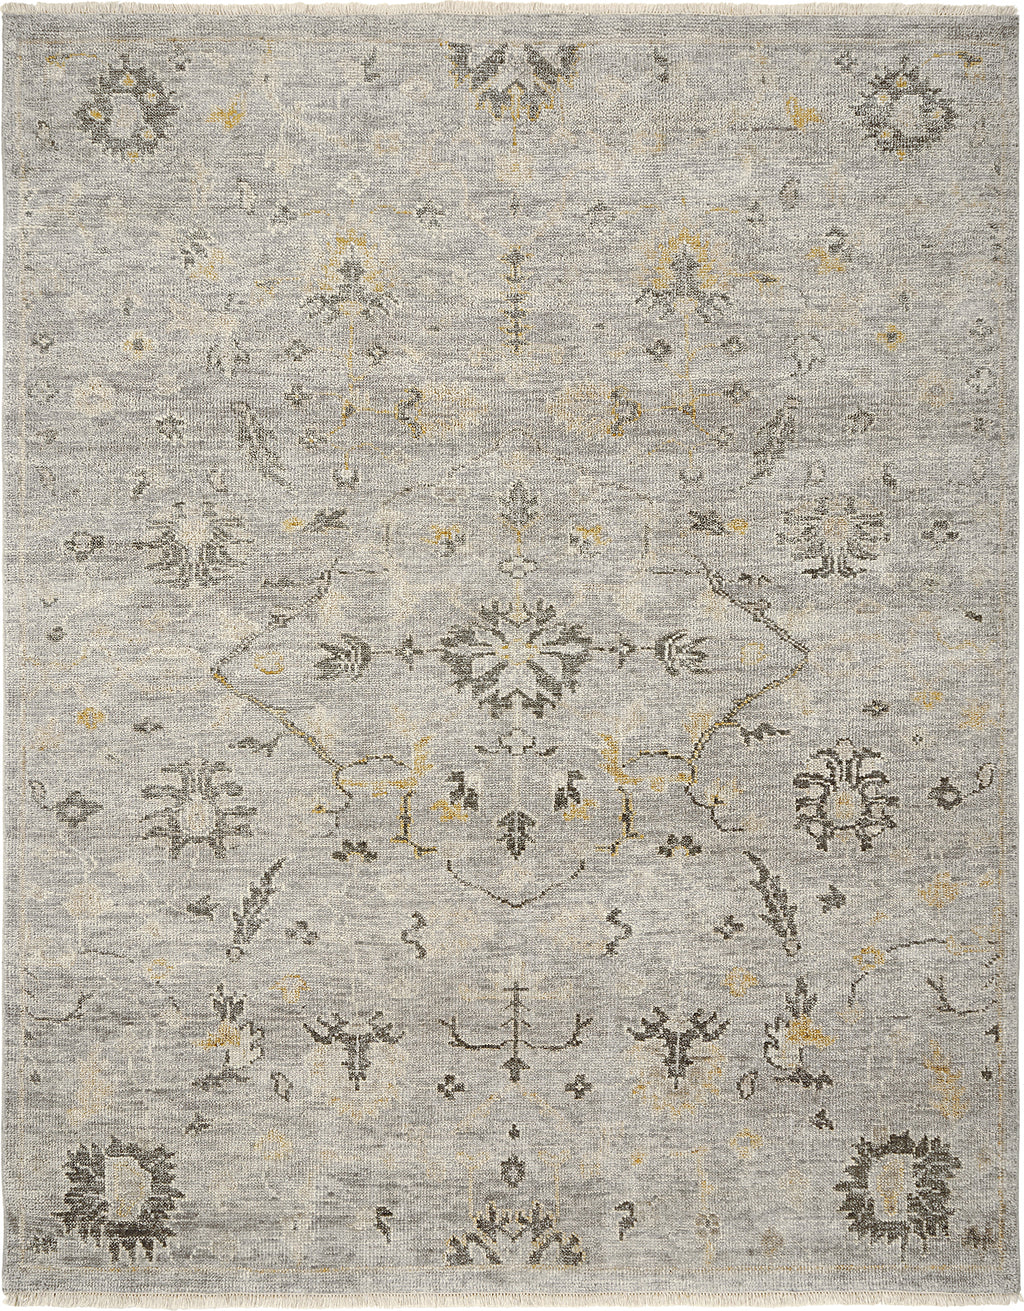 Ancient Boundaries Lily LIL-05 Silver Mist Area Rug main image